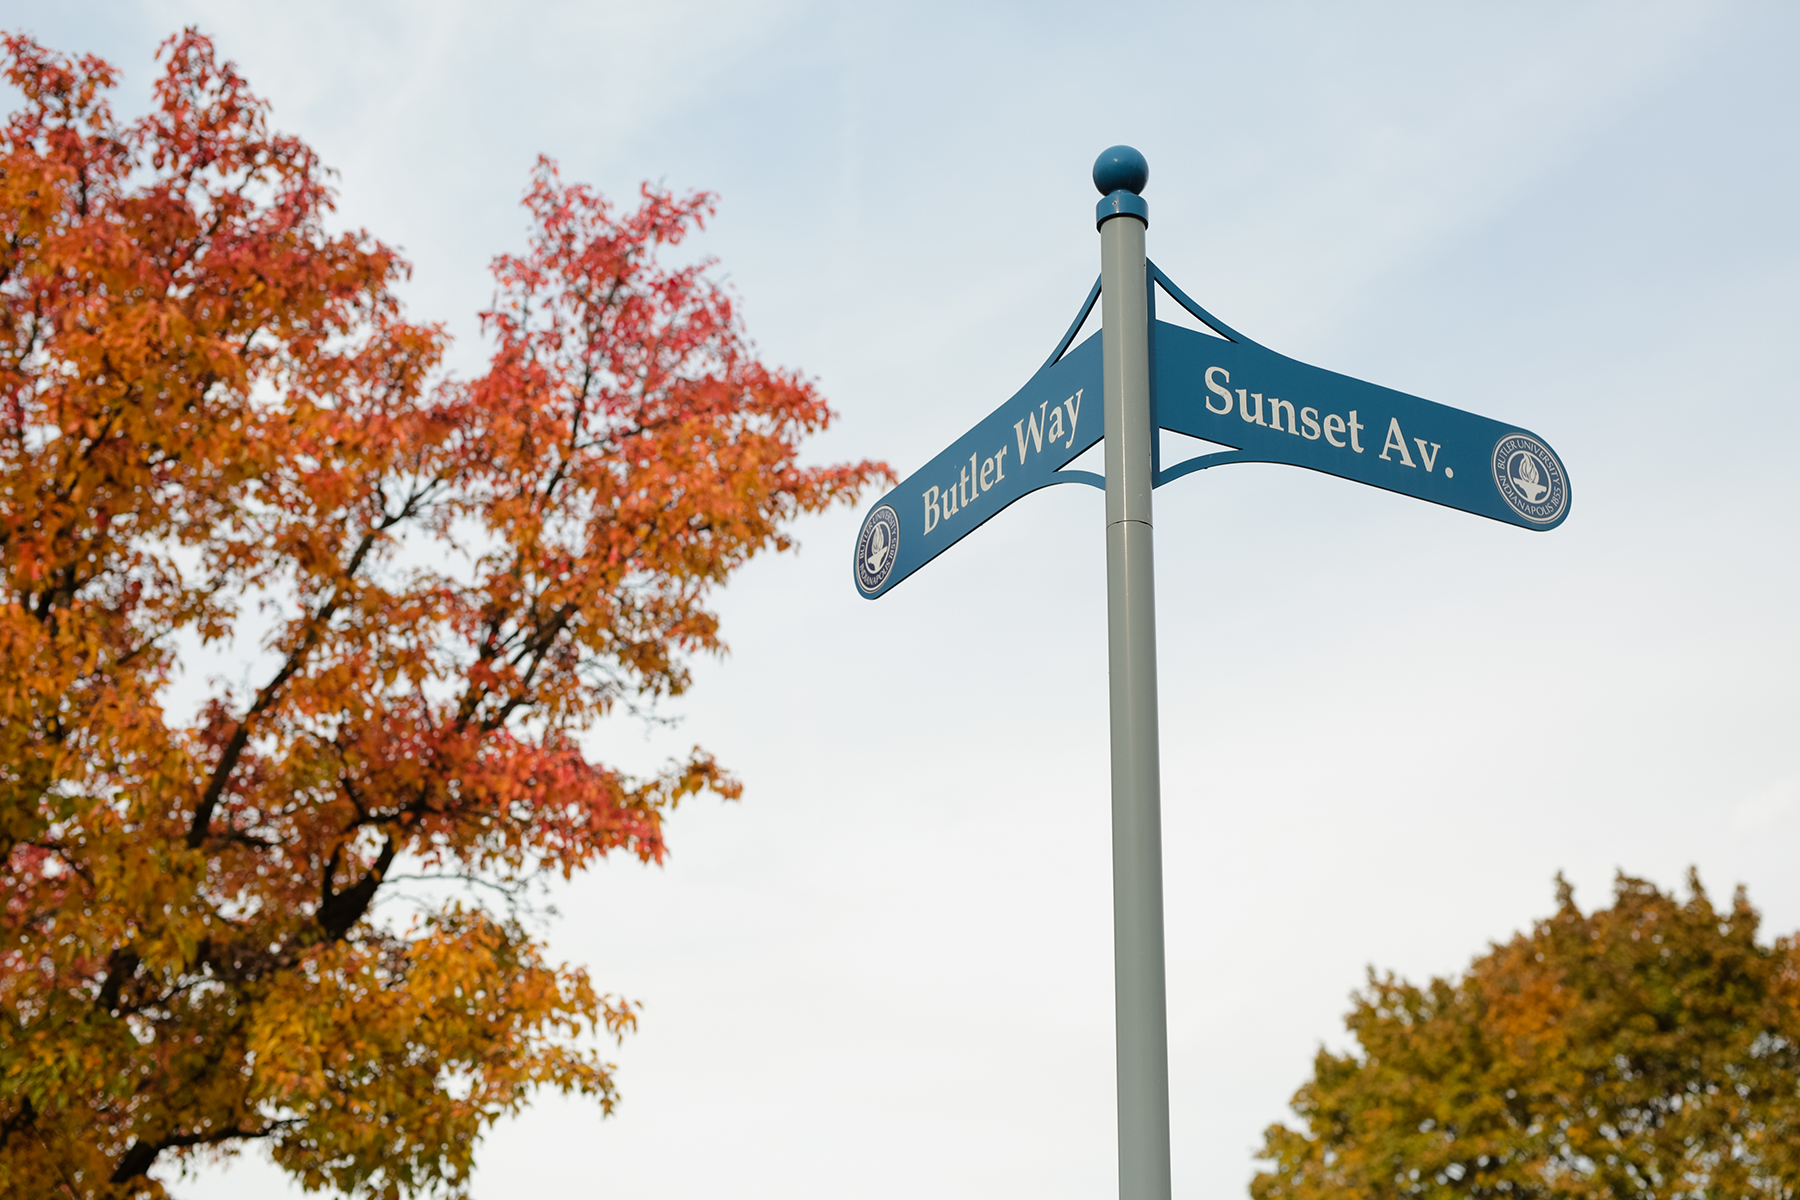 Butler way and Sunset Avenue signs in fall